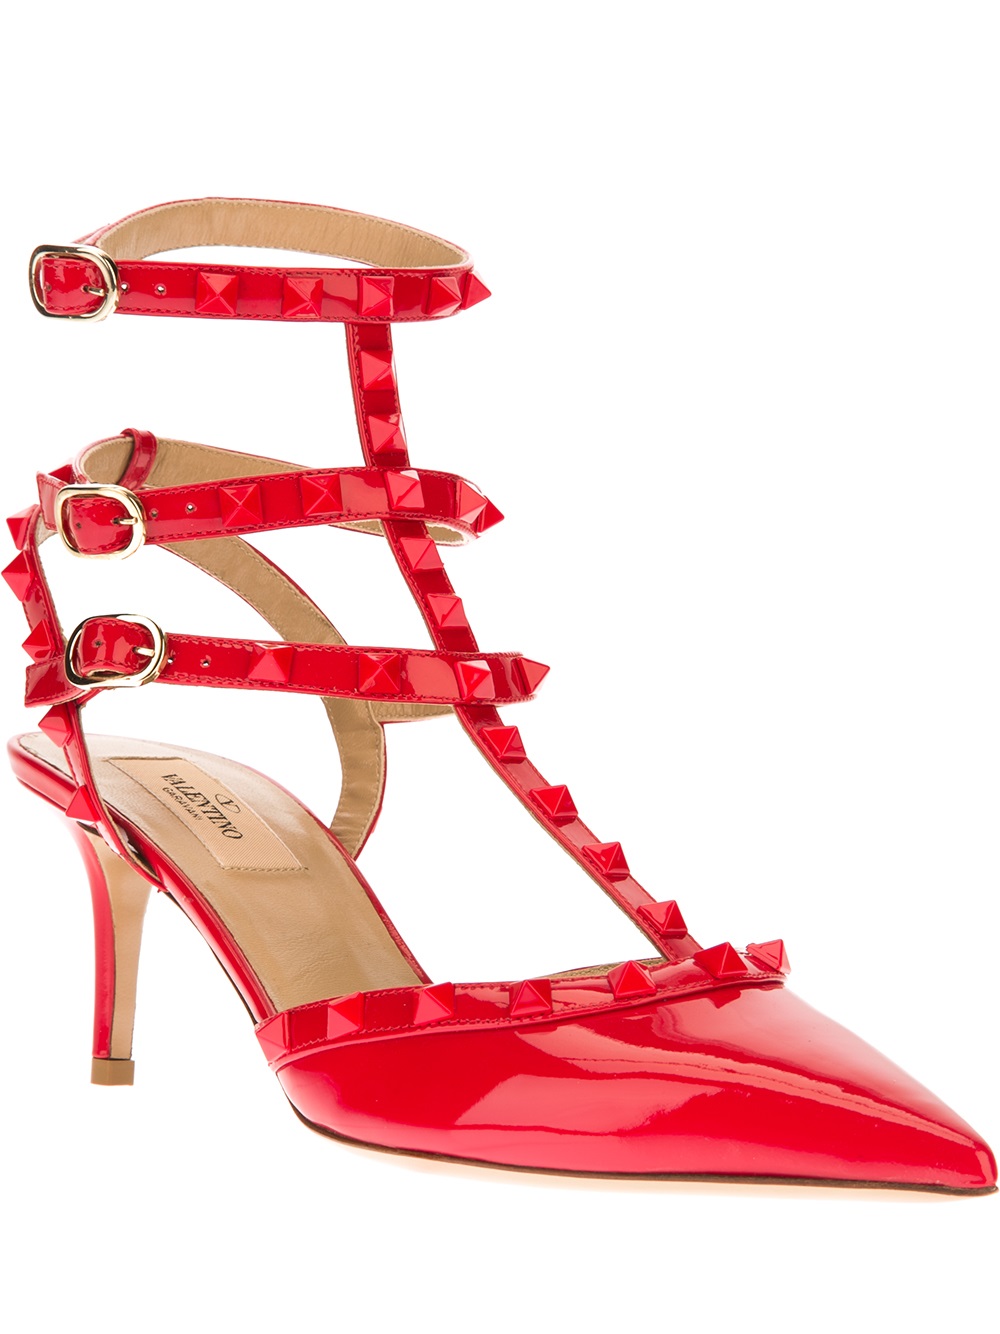 Valentino Studded Mid Heel Sandal in Red - Lyst